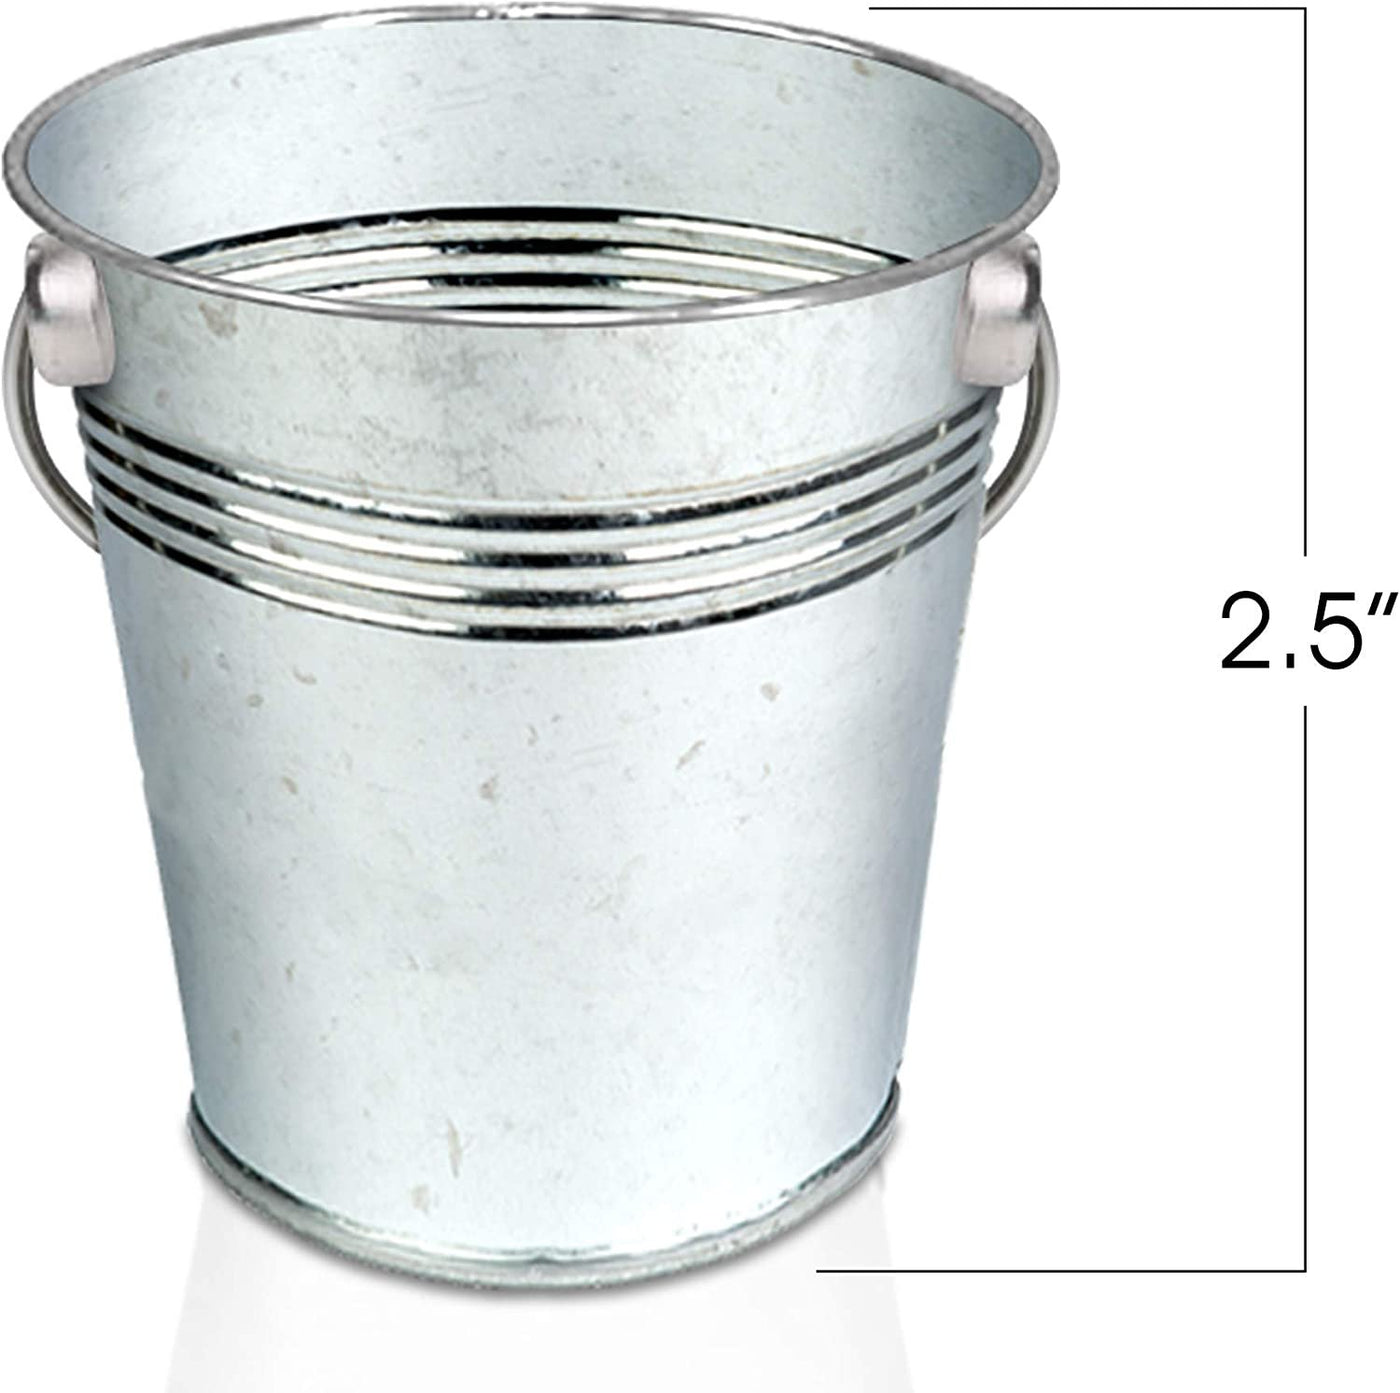 24 Pack Mini Metal Buckets with Handles for Party Favors, Small Galvanized  Tin Pails (2 x 2 In)